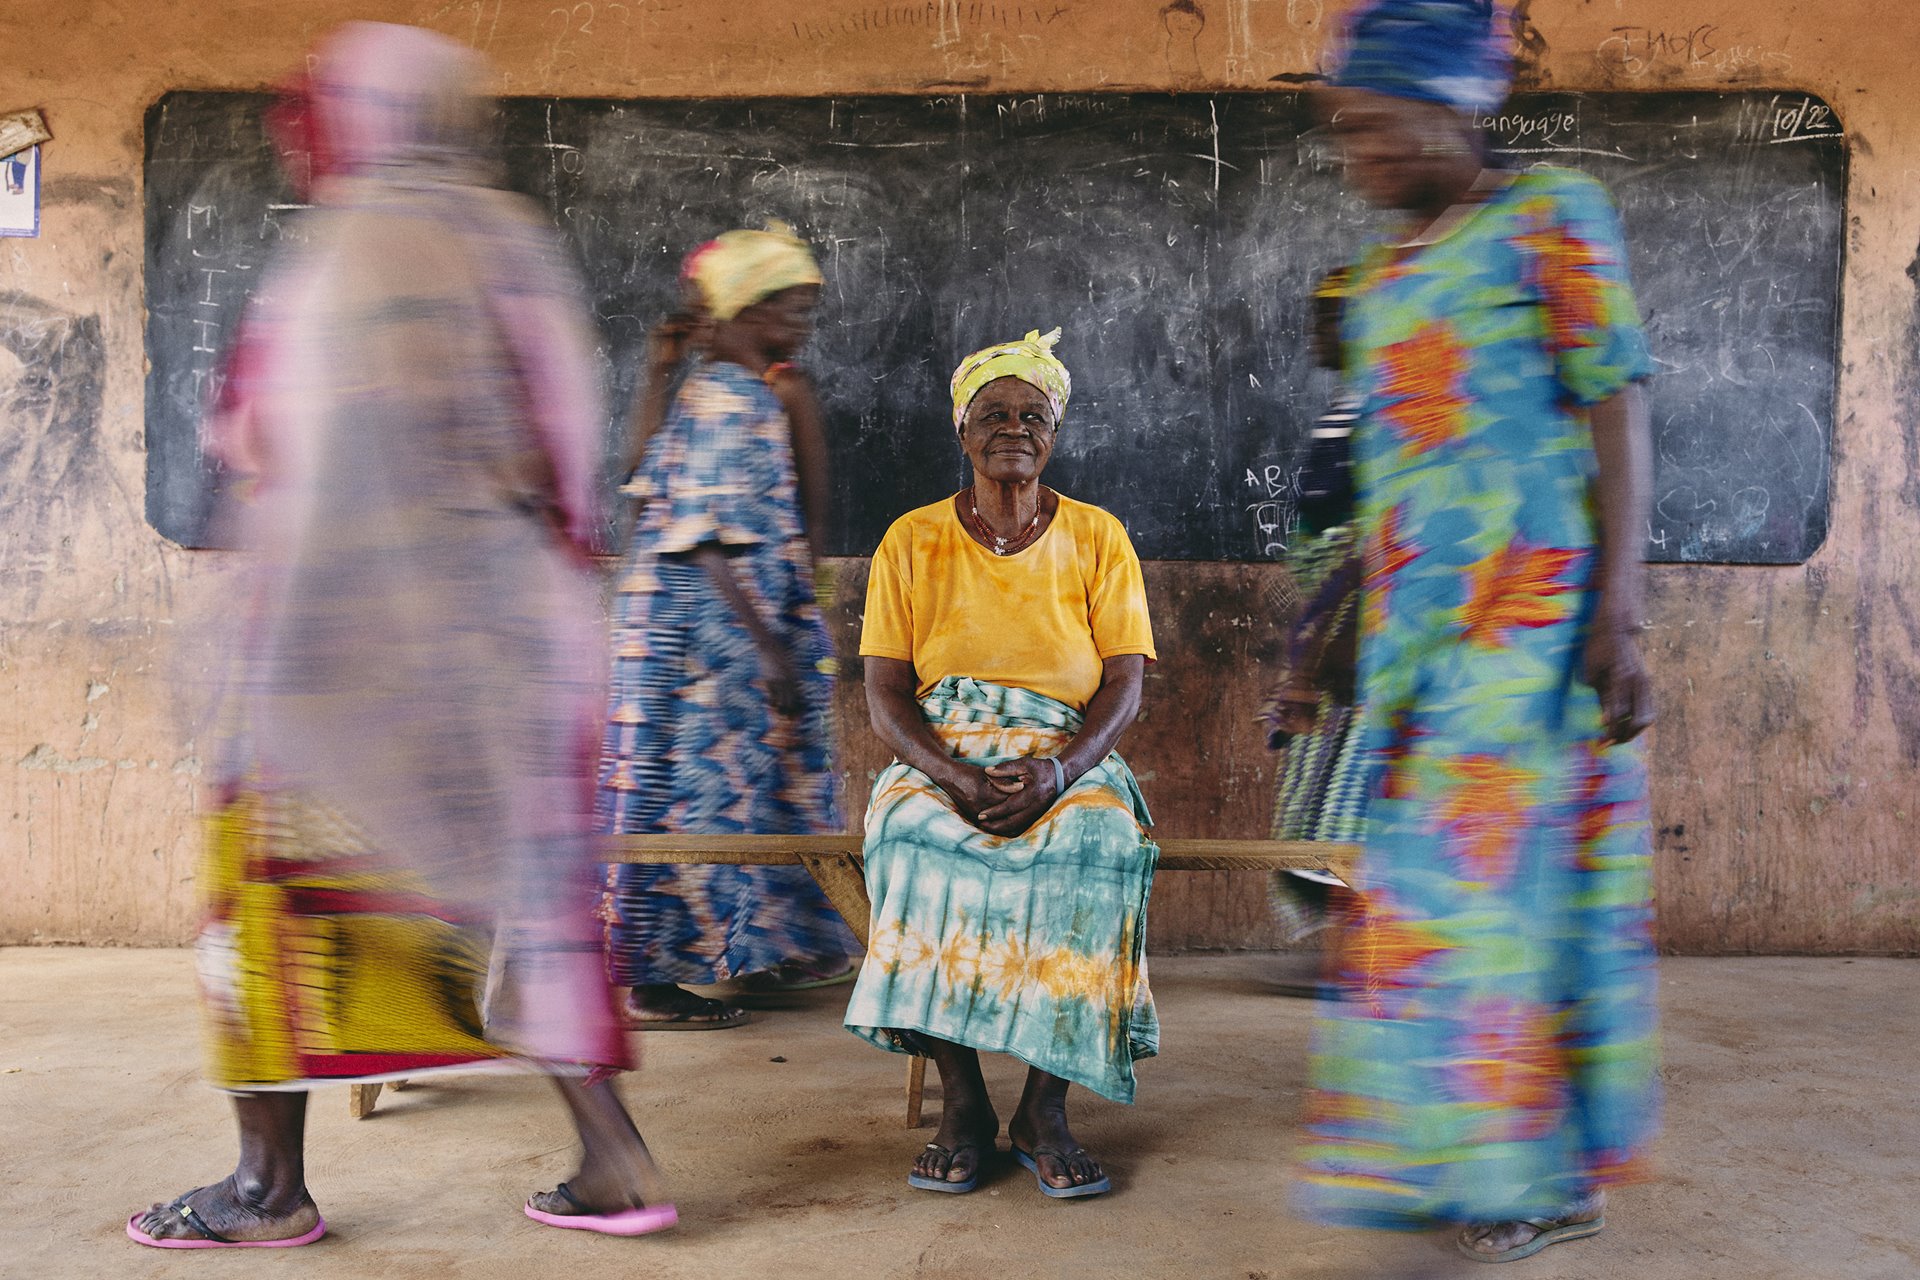 Sugri Zenabu, a <em>mangazia</em> (female community leader) of the Gambaga &ldquo;witch camp&rdquo;, sits encircled by residents in Gambaga, Ghana. Zenabu shows some signs of confusion and memory loss associated with dementia.